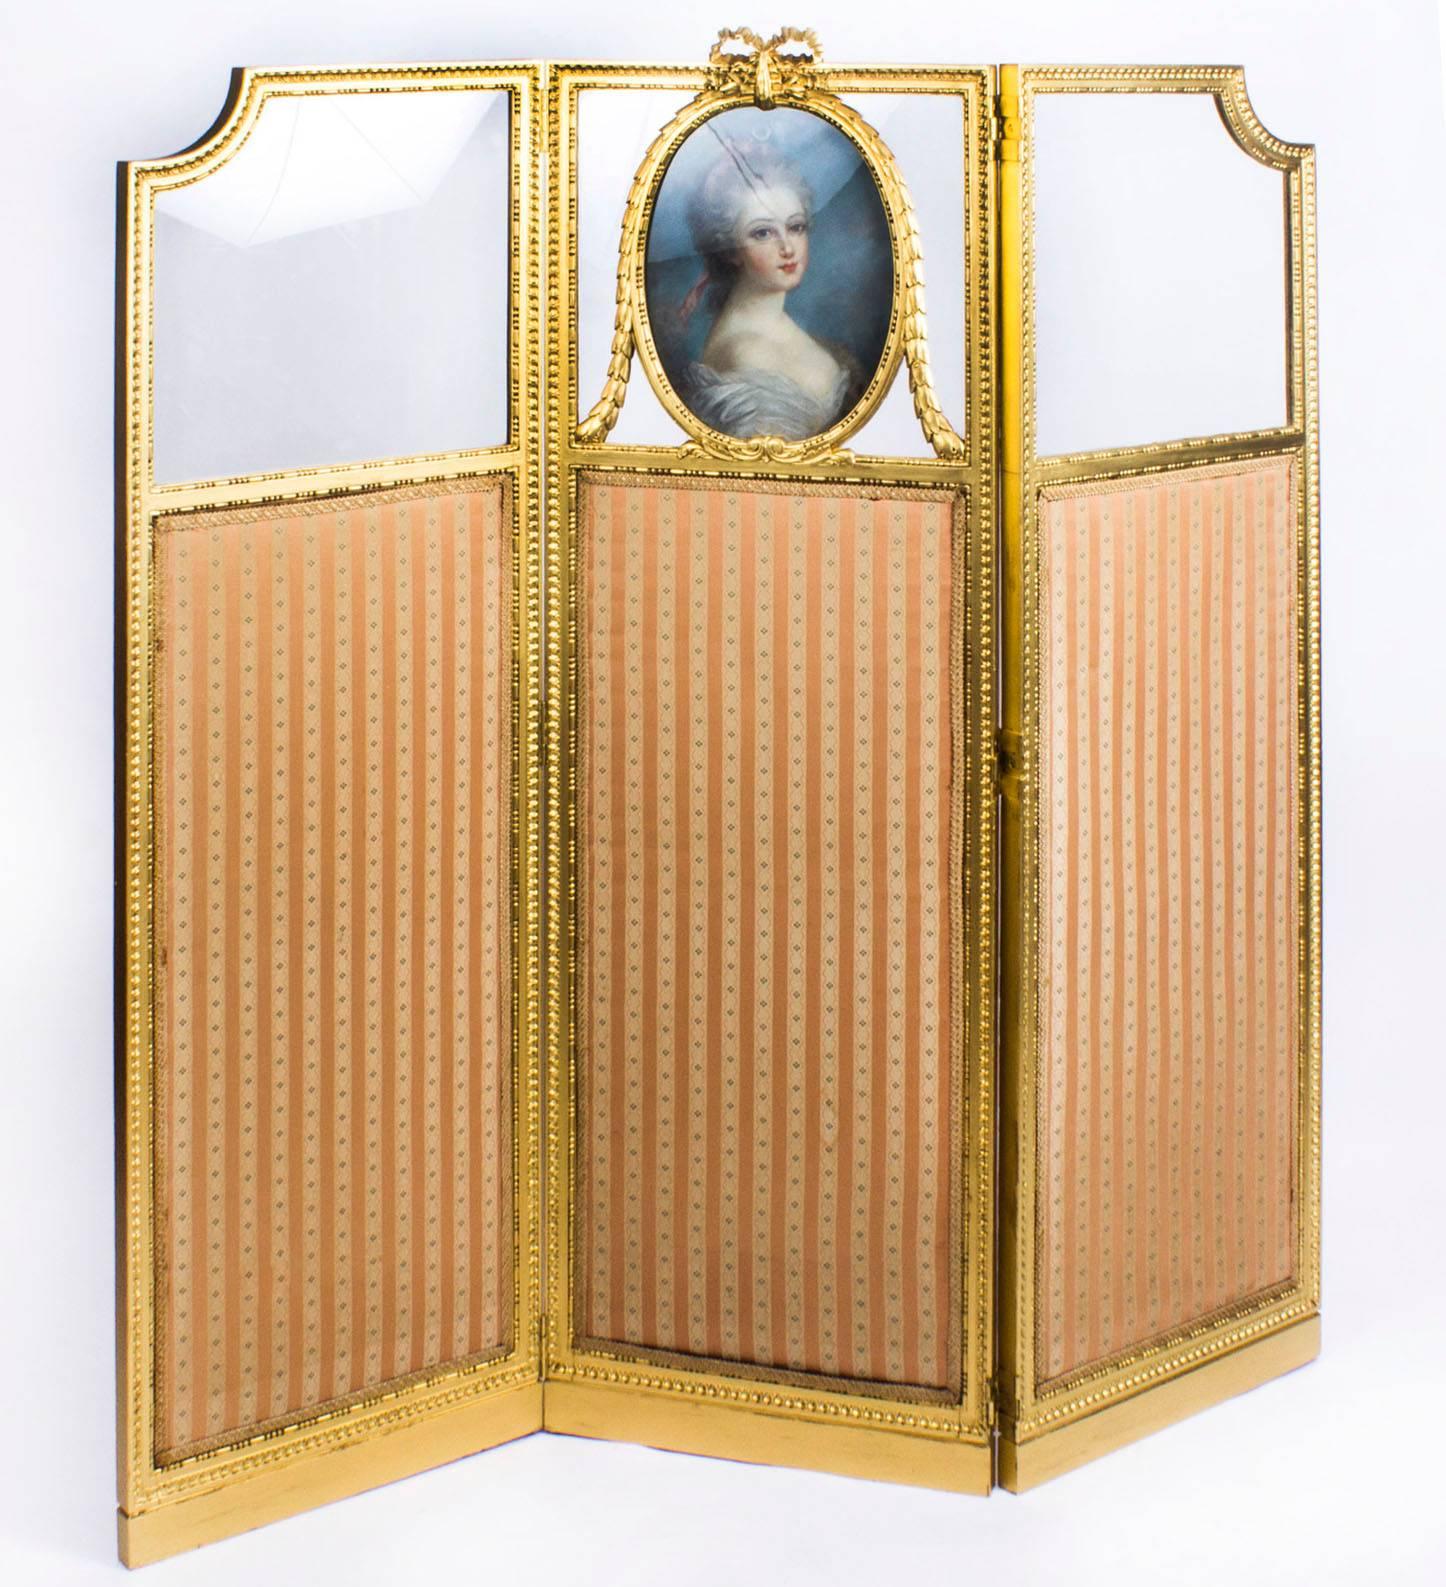 A fine beautiful antique French Louis Revival giltwood dressing screen, circa 1870 in date.

The screen features three beautifully carved beaded egg and dart rectangular frames each with gold and floral striped upholstered panels. The shaped tops